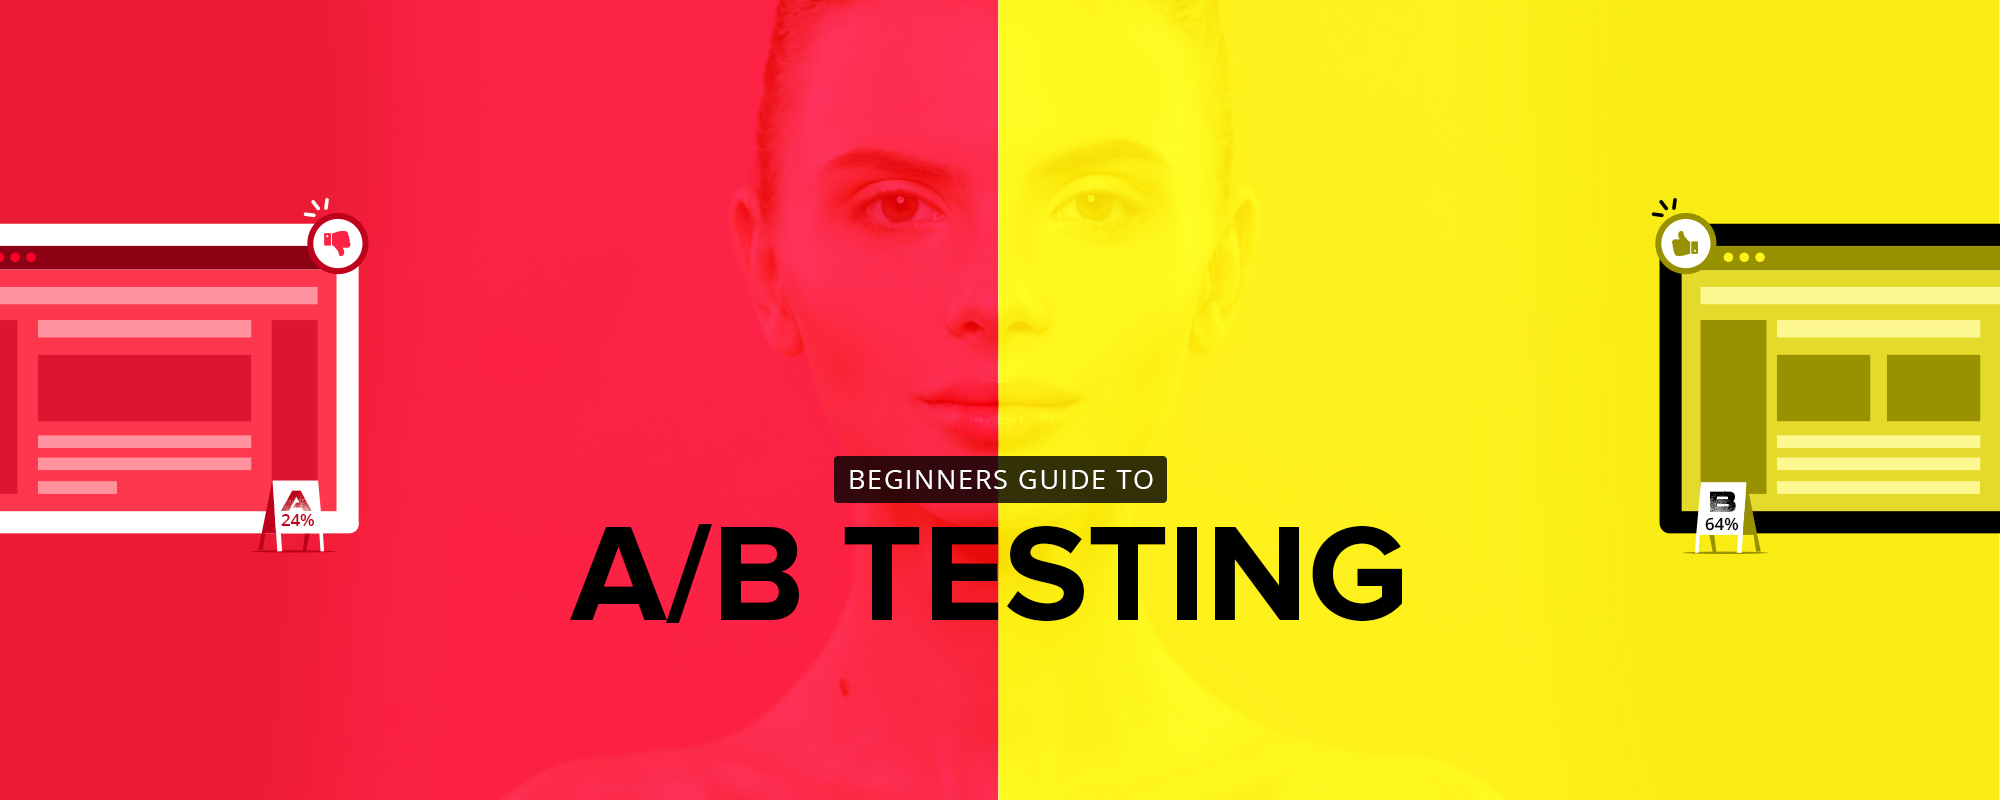 How to do A/B Testing like an Expert – A Beginner’s Guide to Improve Website Conversion